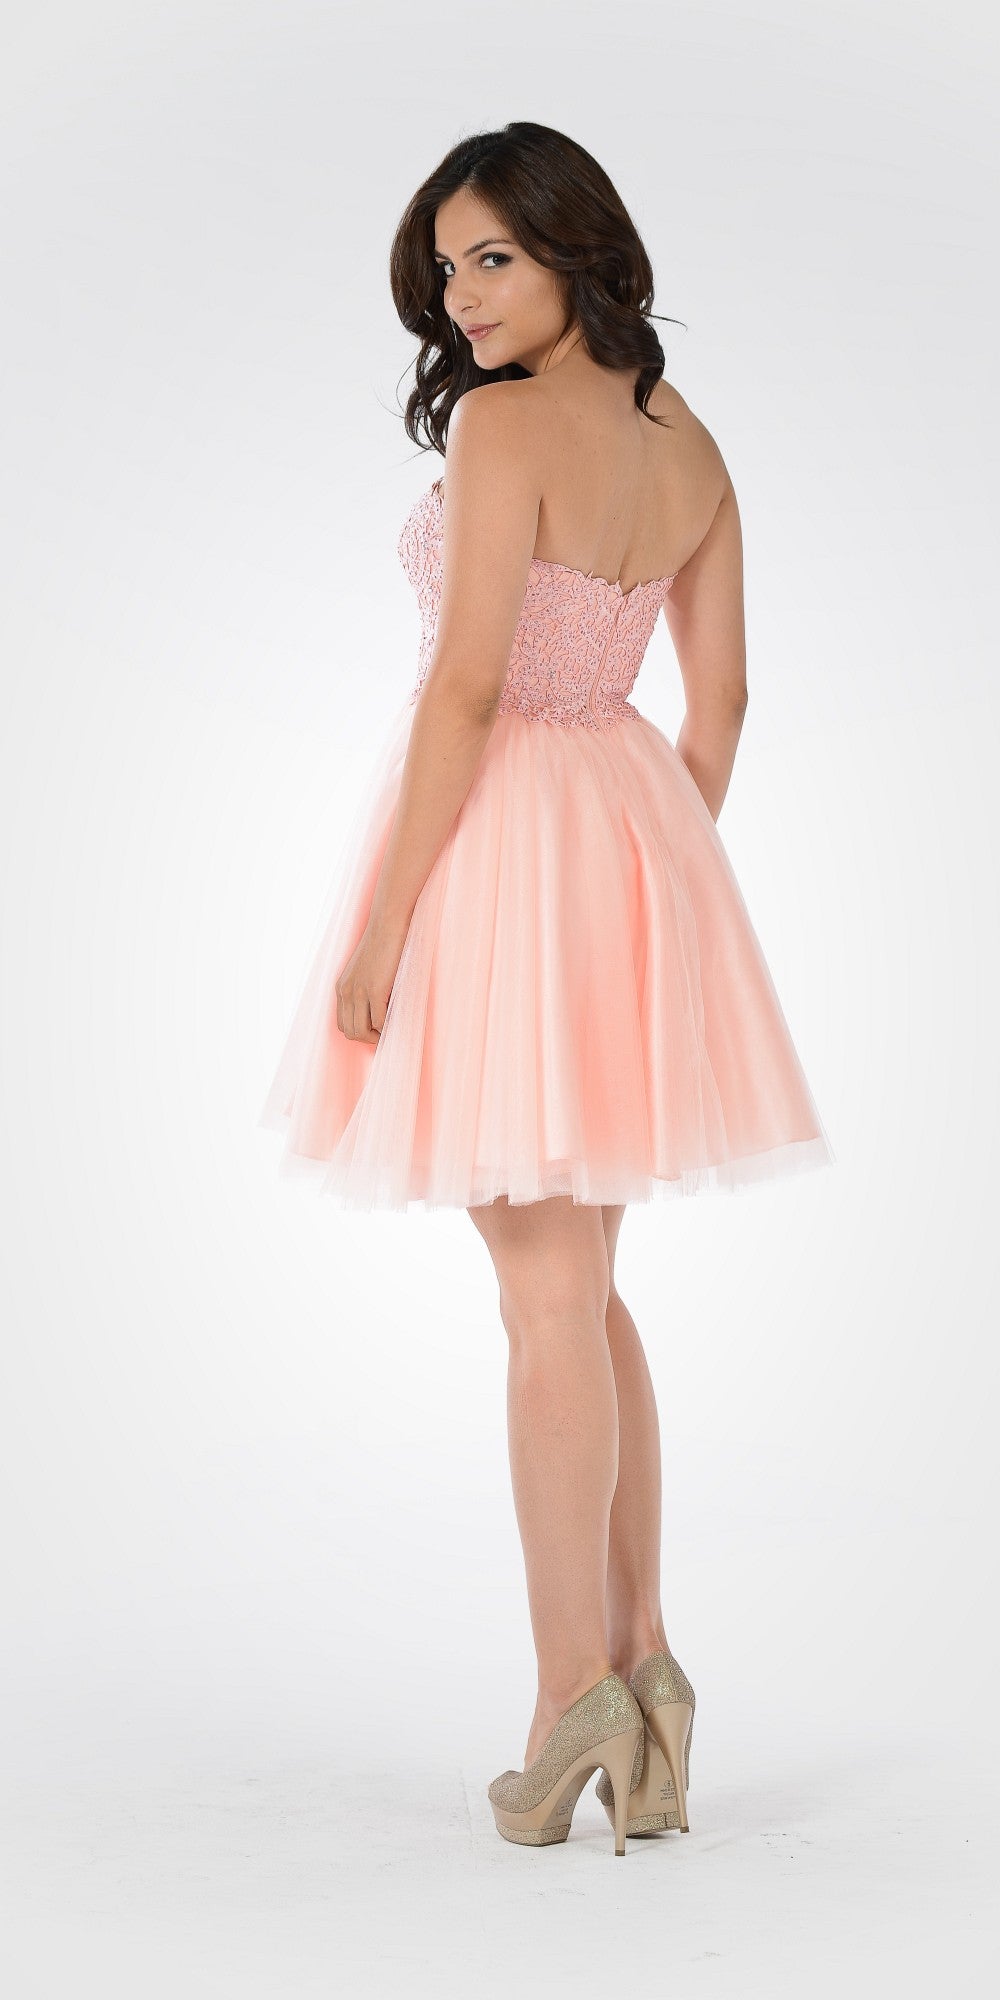 Poly USA 7718 - Lace Bodice Tulle Skirt A-line Homecoming Dress Strapless Pink